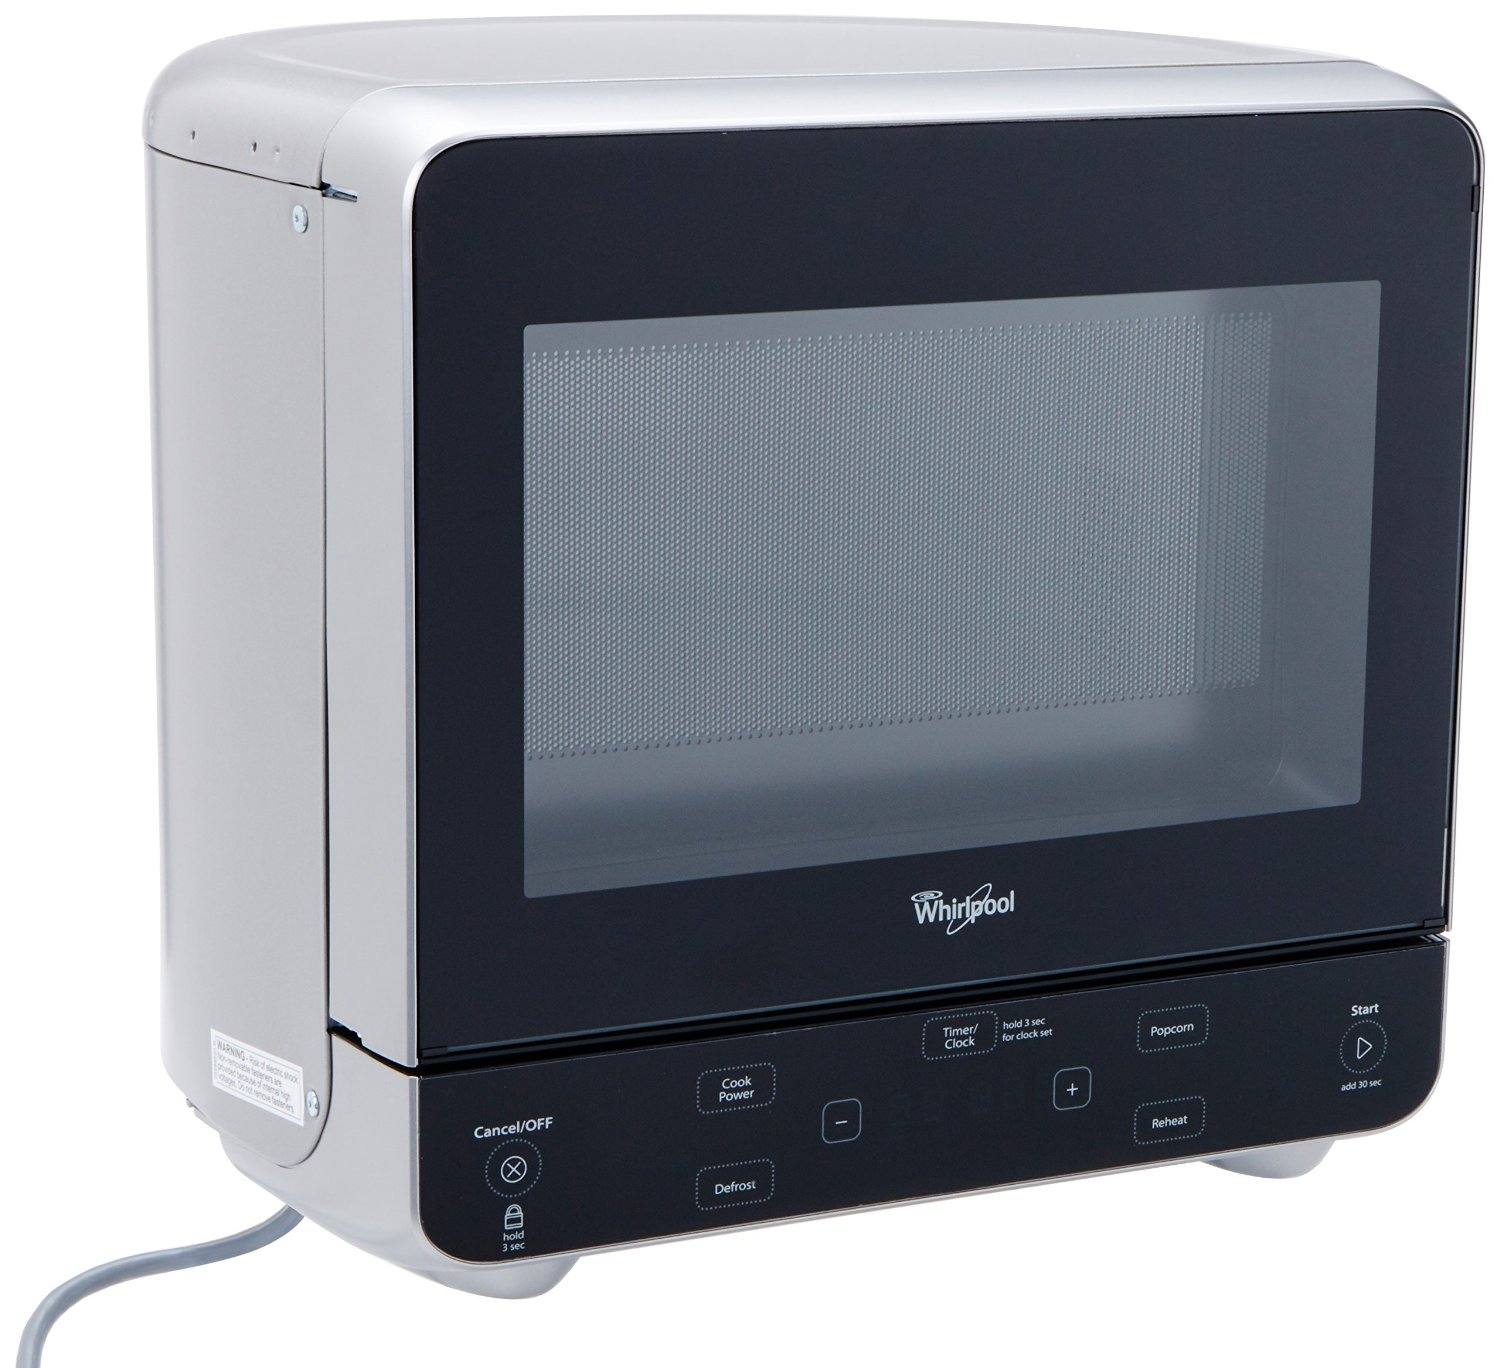 Smallest Microwave Oven On The Market Revealed